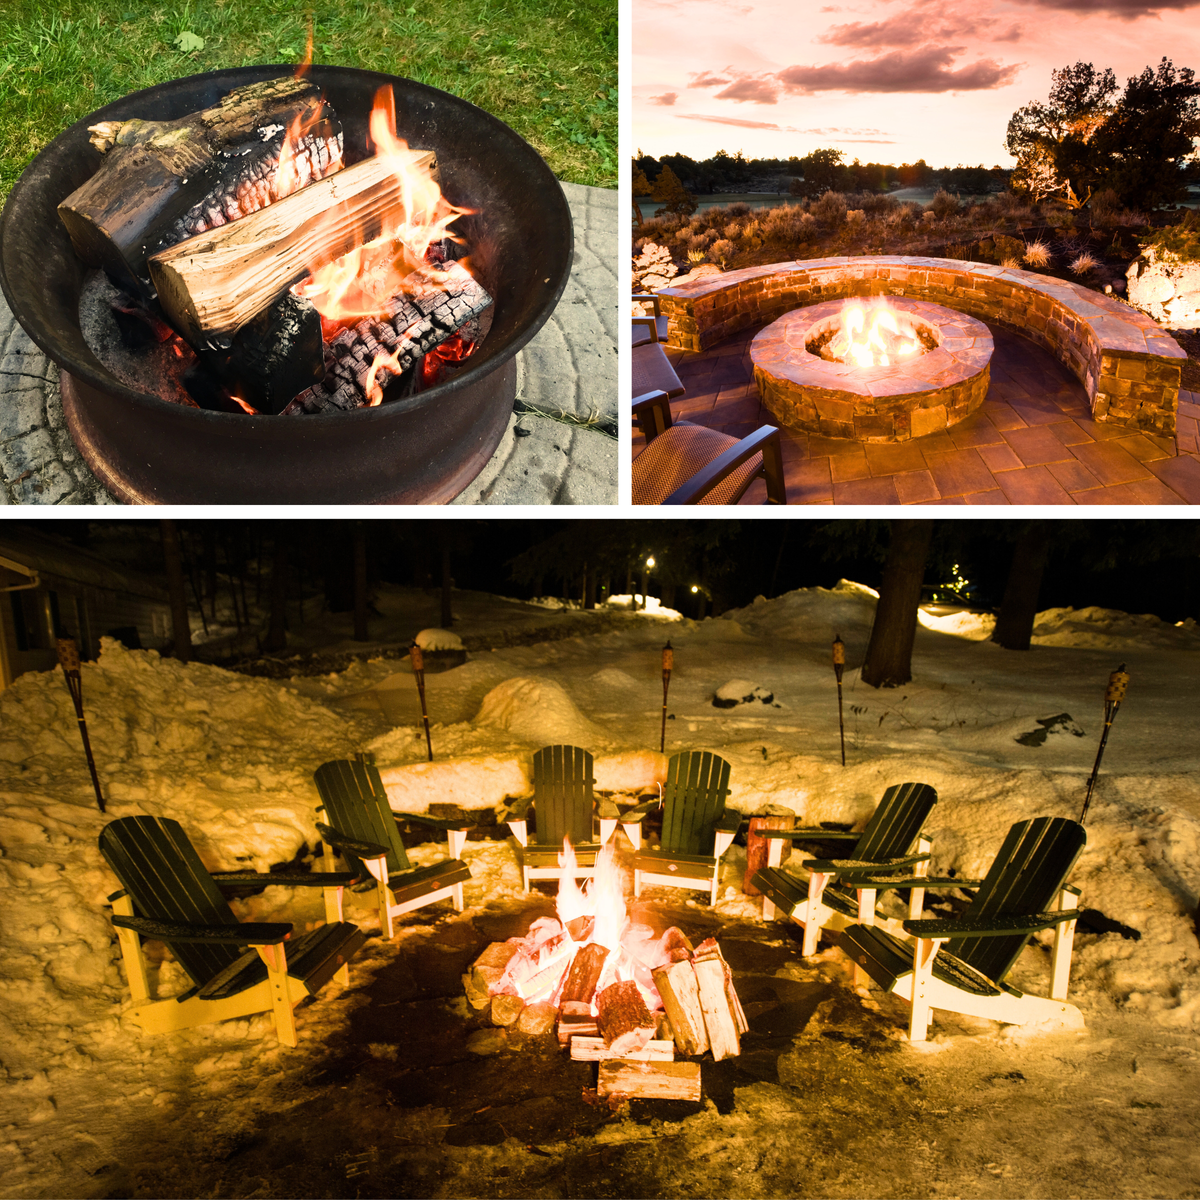 Fire pit with chairs in snow, stone seat fire pit, simple round wood fire pit